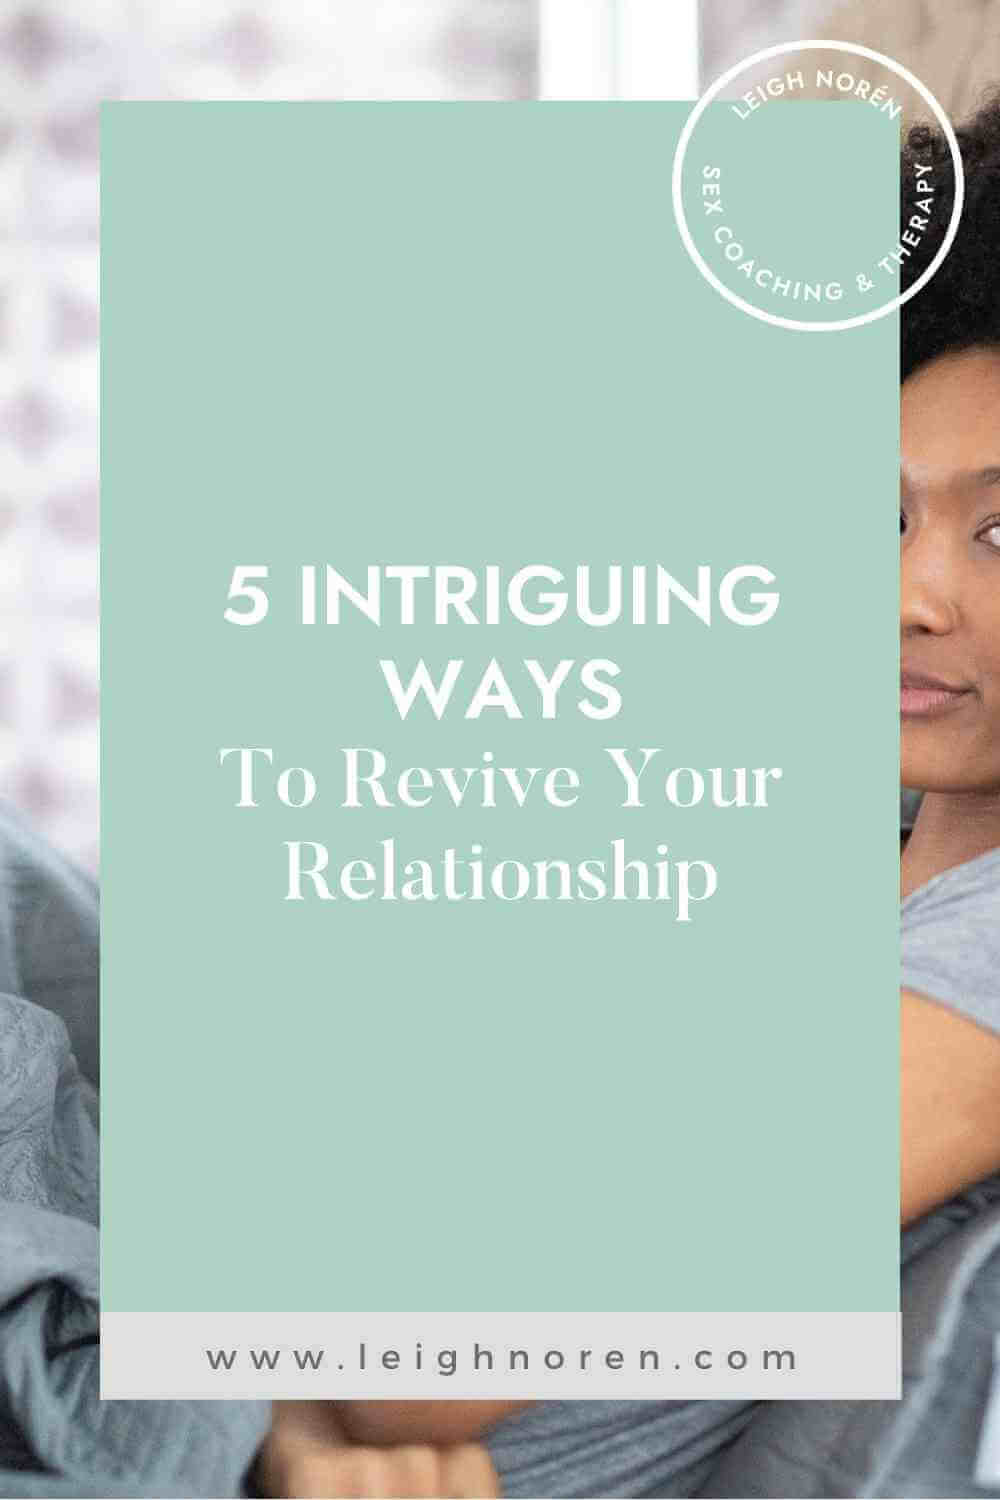 5 Intriguing Ways To Revive Your Relationship